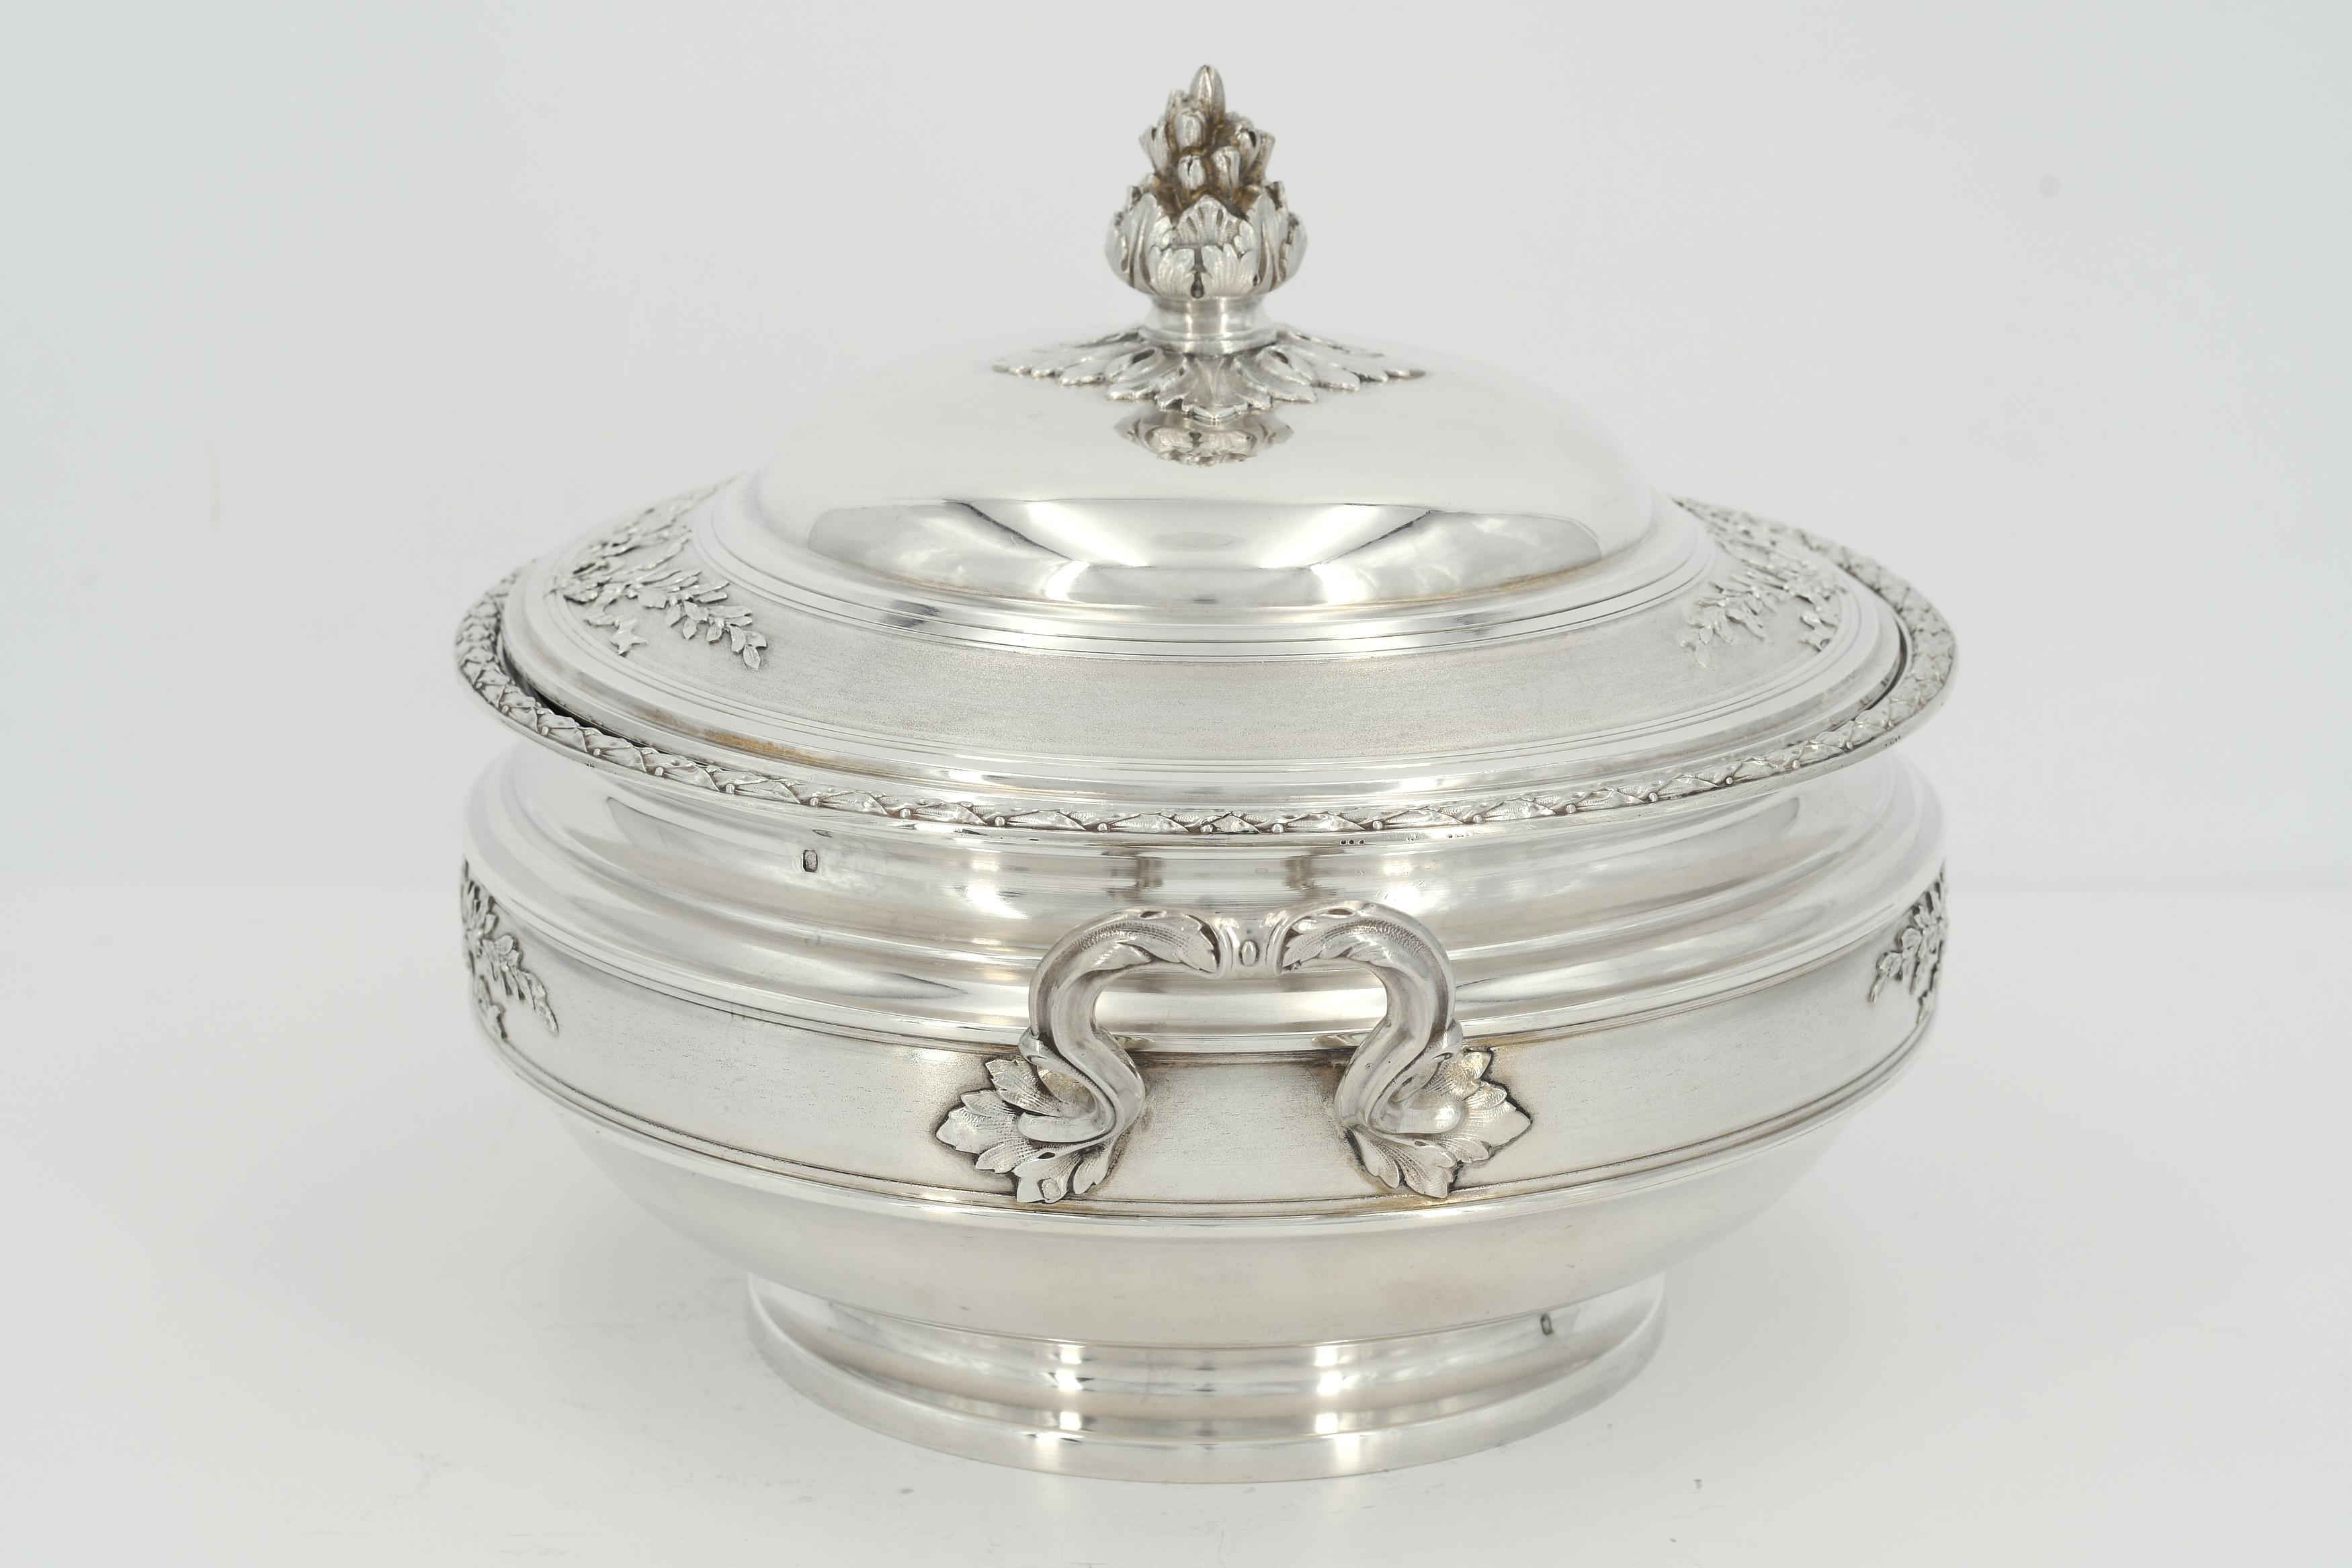 Silver vegetable bowl with laurel wreaths and floral knob - Image 5 of 8